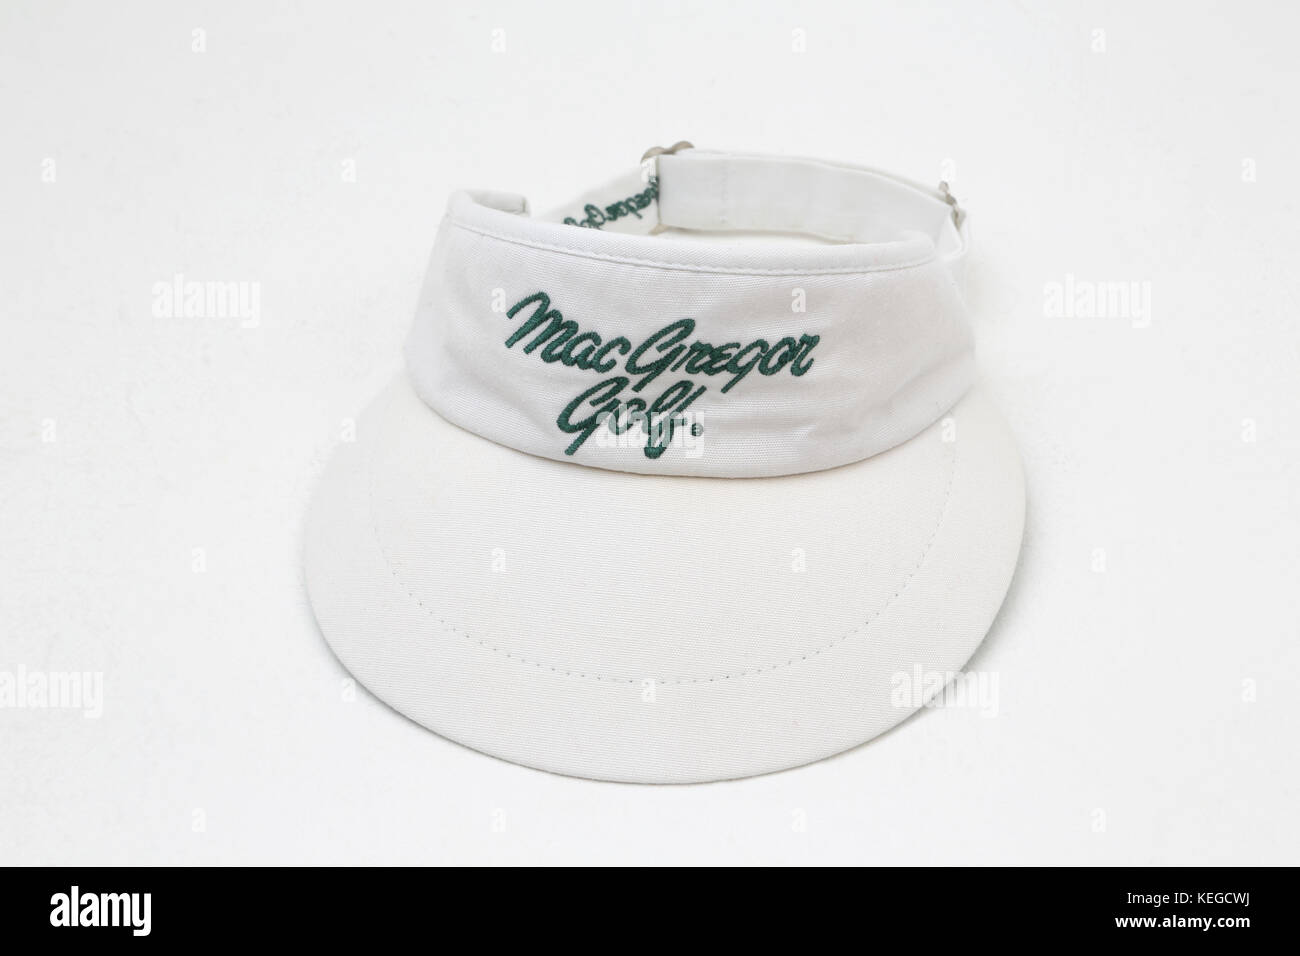 Macgregor golf hi-res stock photography and images - Alamy